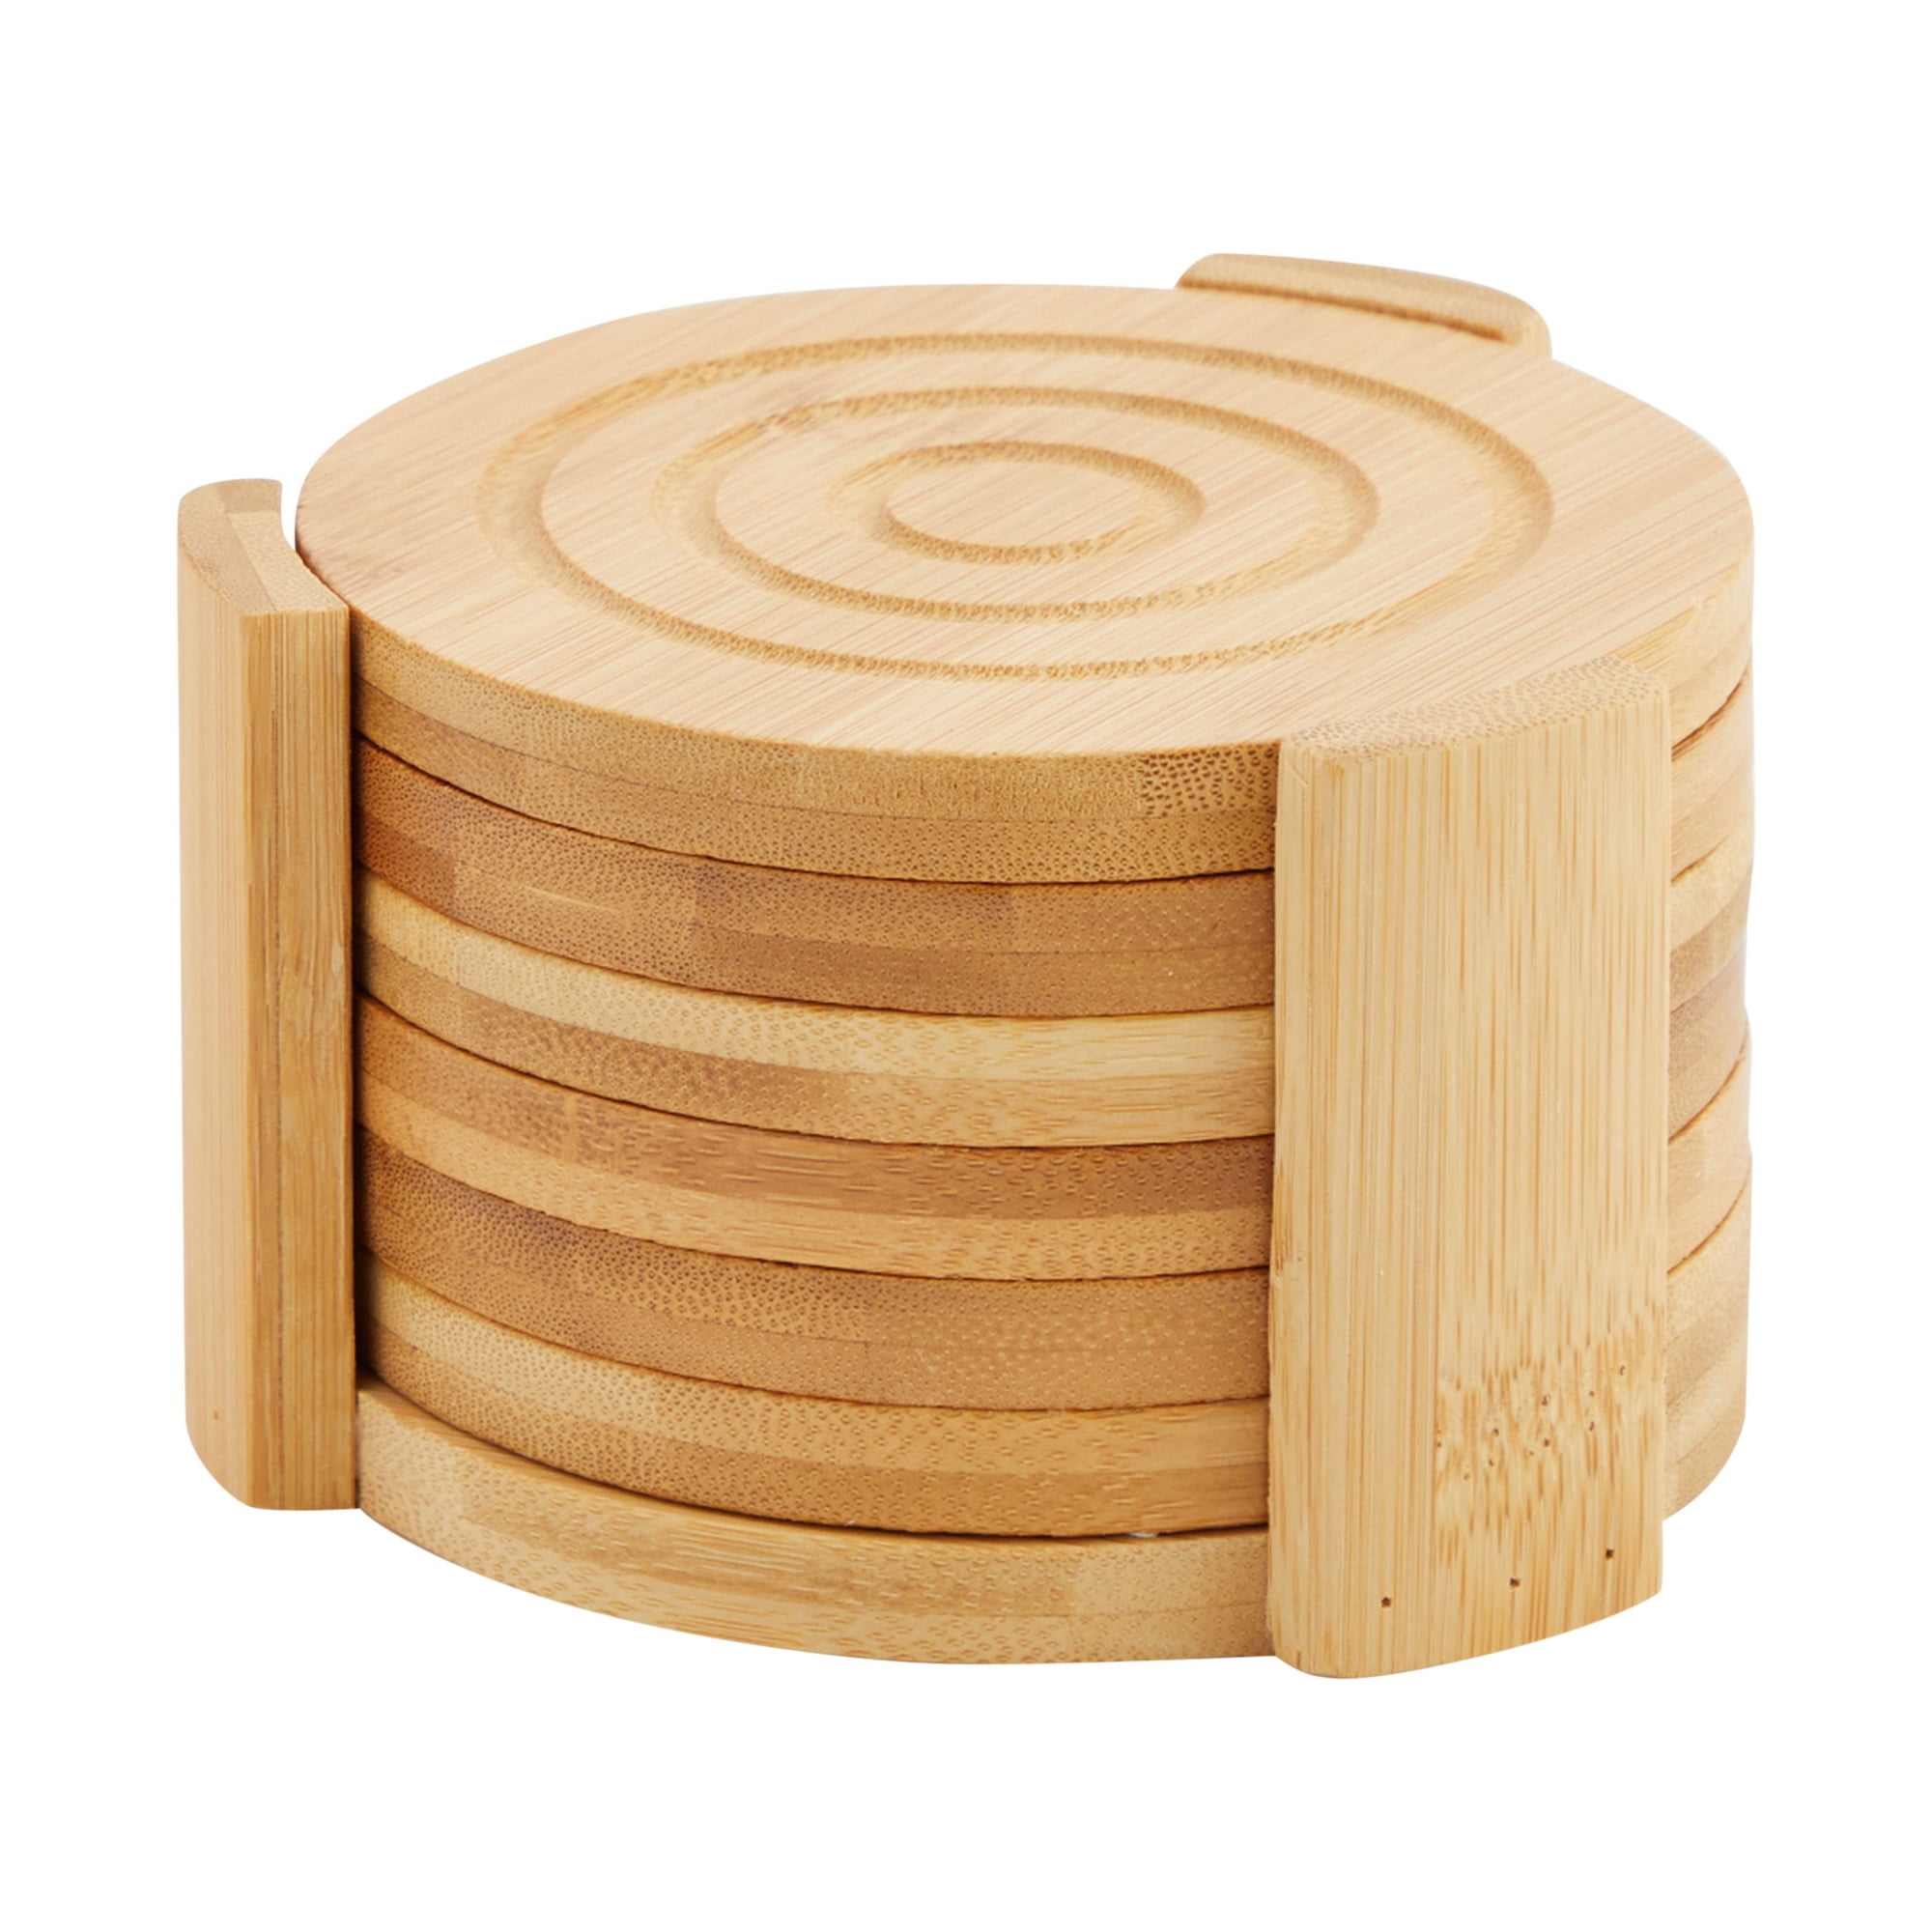 Wooden Coasters With Non-Rustic Log Holder